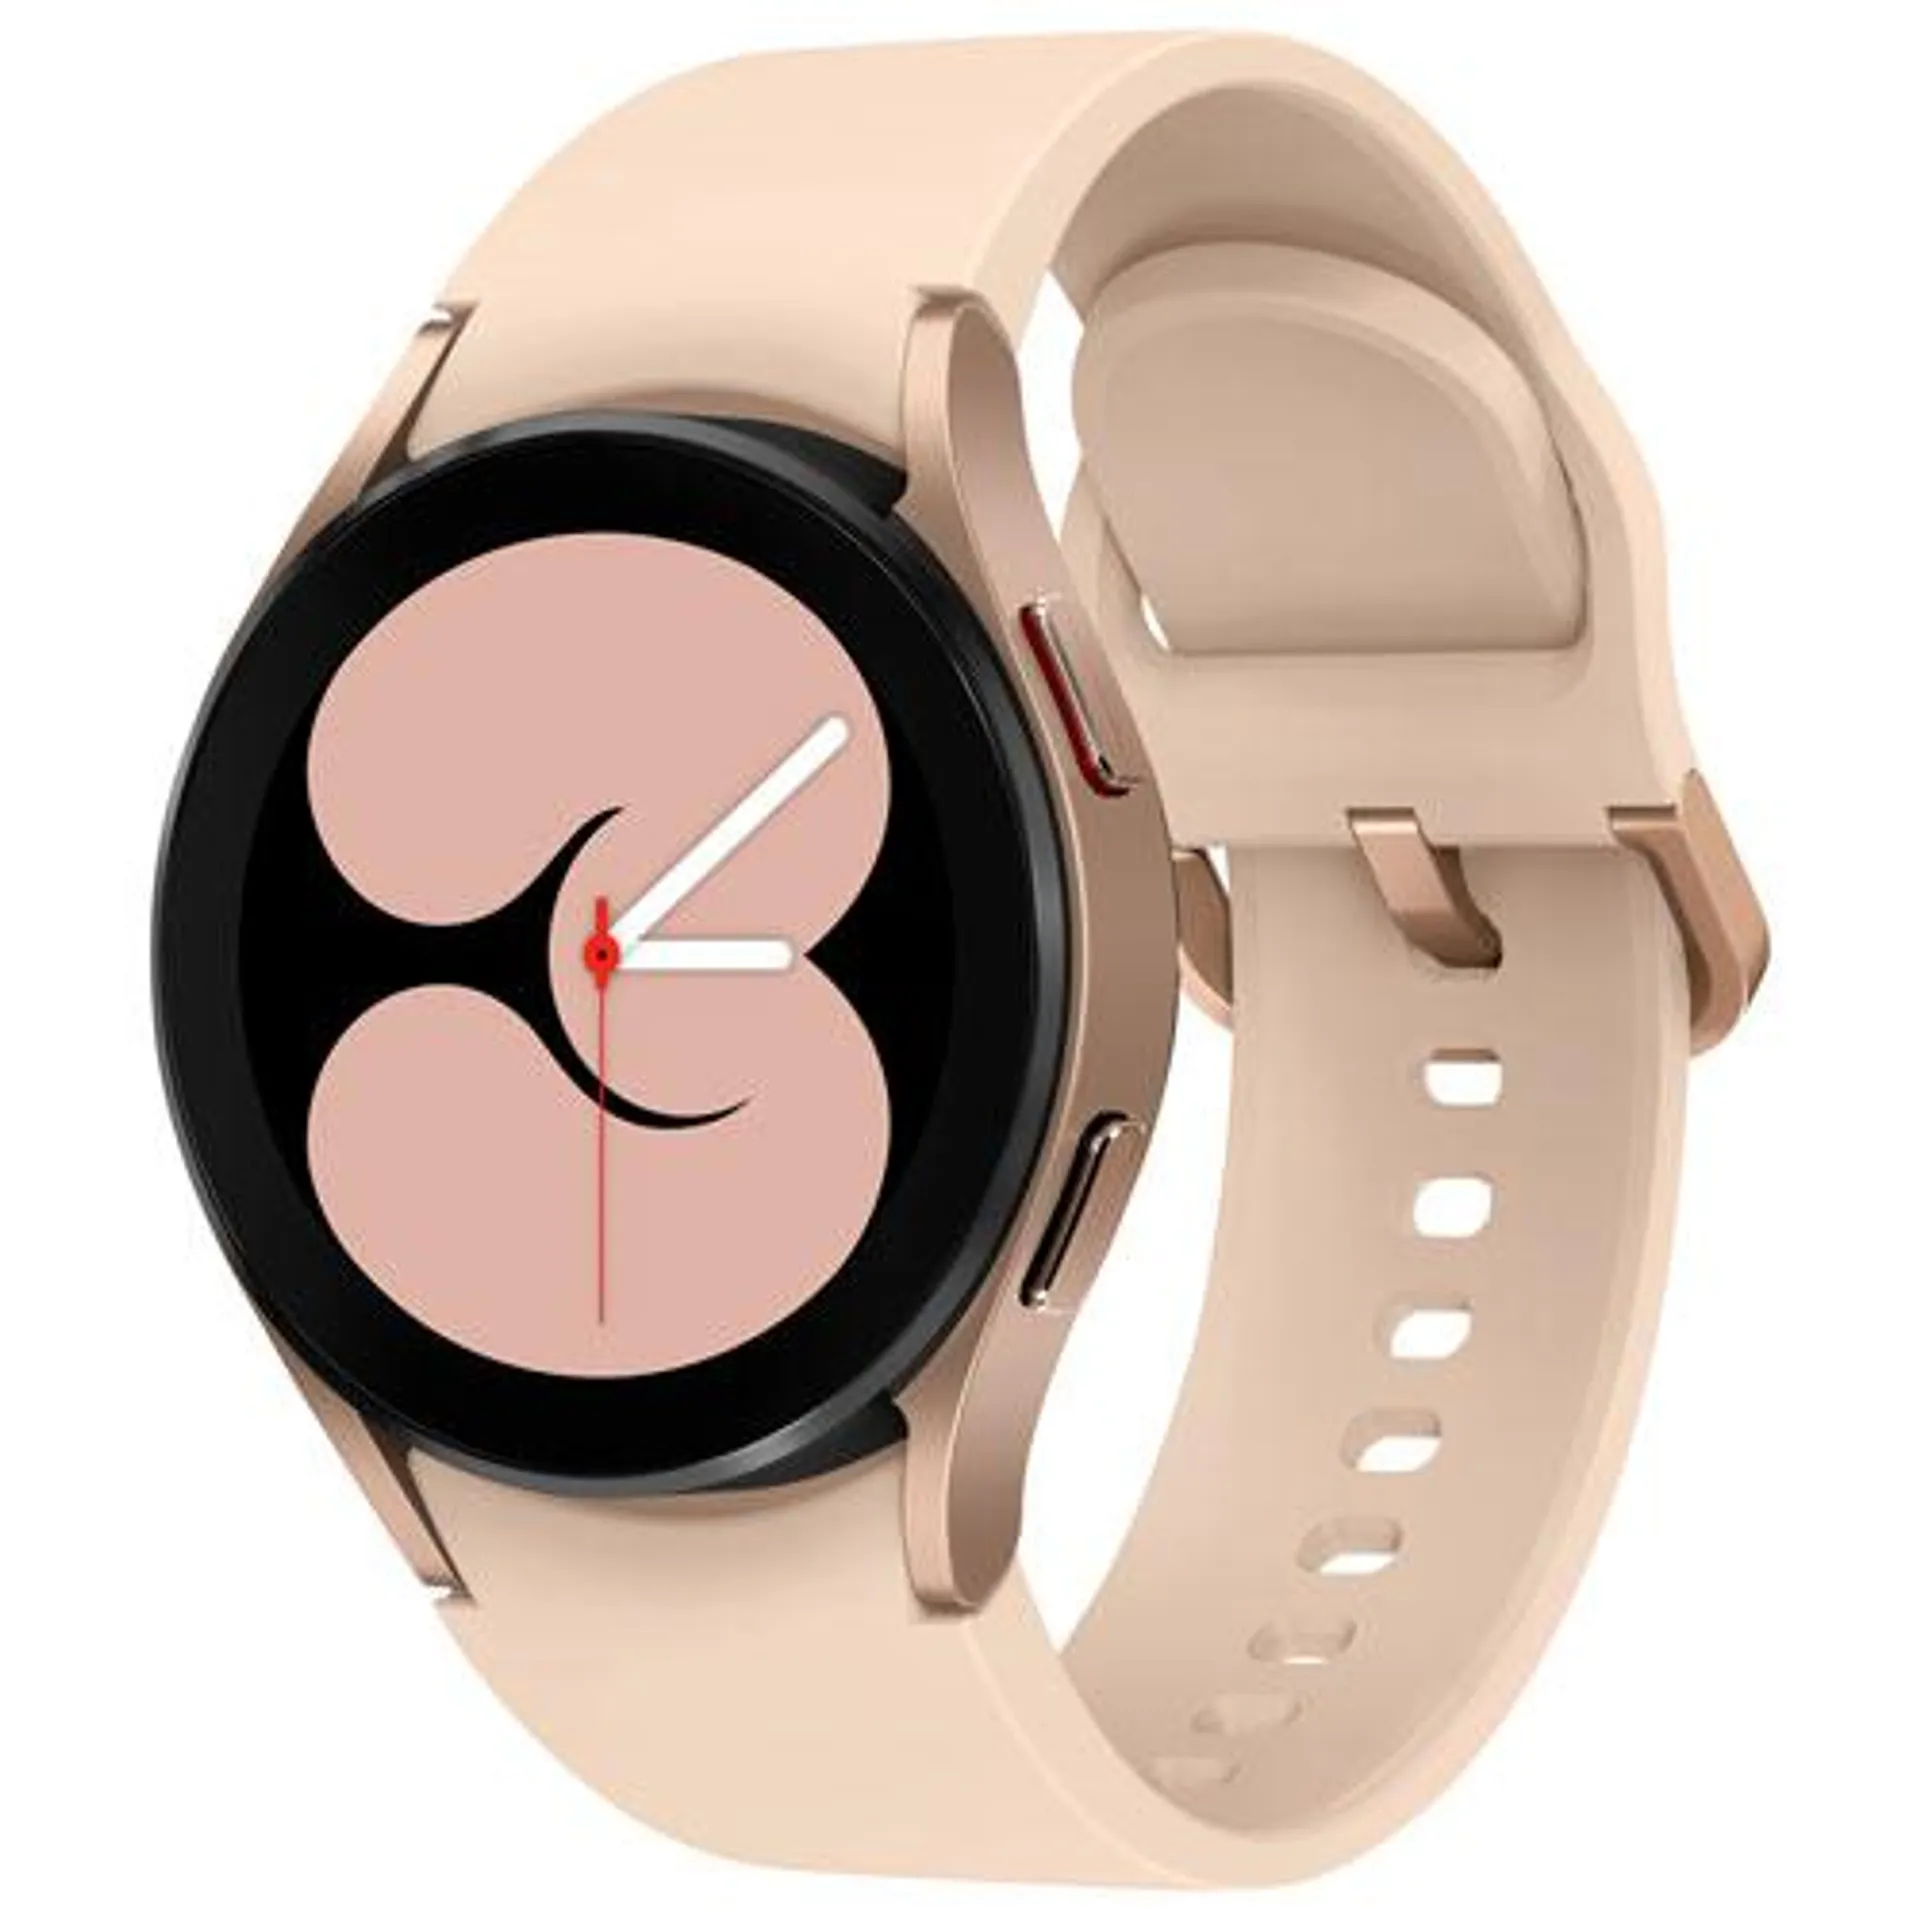 Samsung Galaxy Watch4 40mm Smartwatch with Heart Rate Monitor - Pink Gold